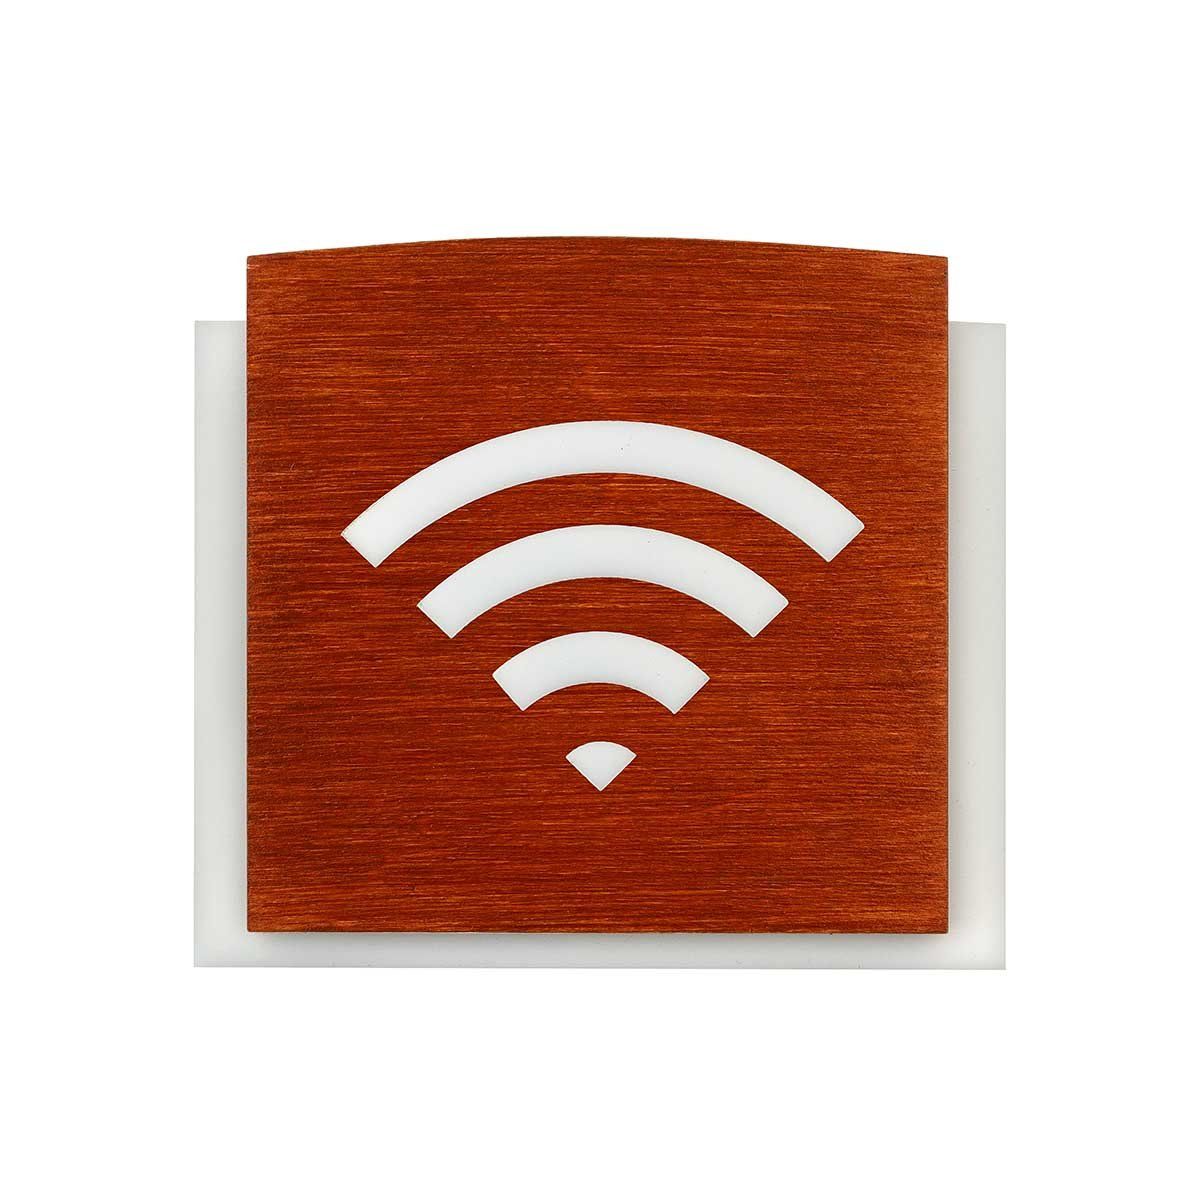 Wooden Wi-Fi Plate for Waiting Room Information signs Redwood Bsign